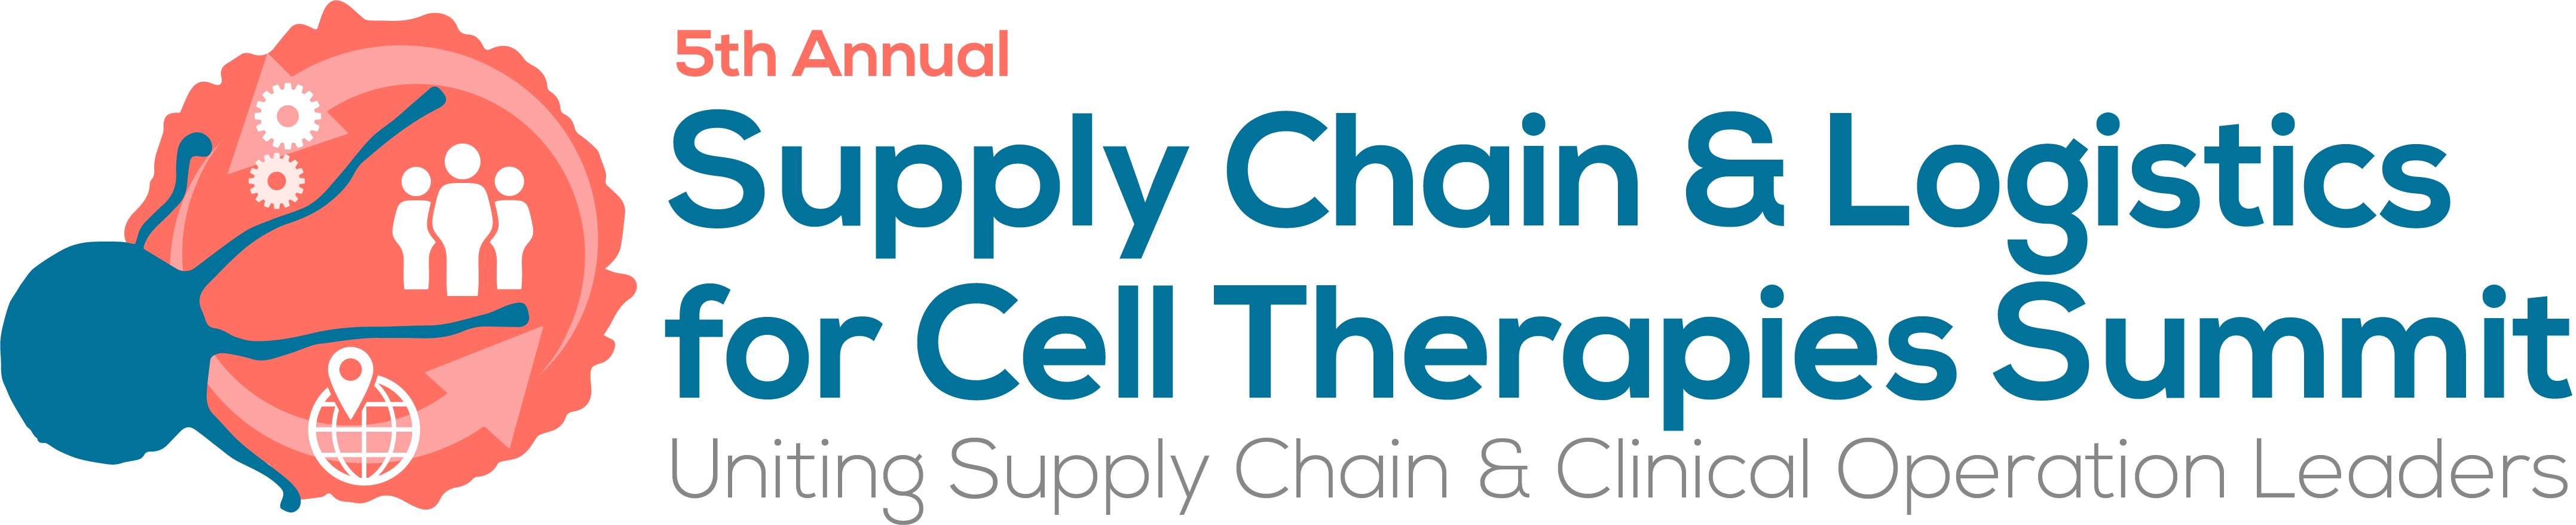 5th Annual Supply Chain& Logistics for Cell Therapies Summit (1)